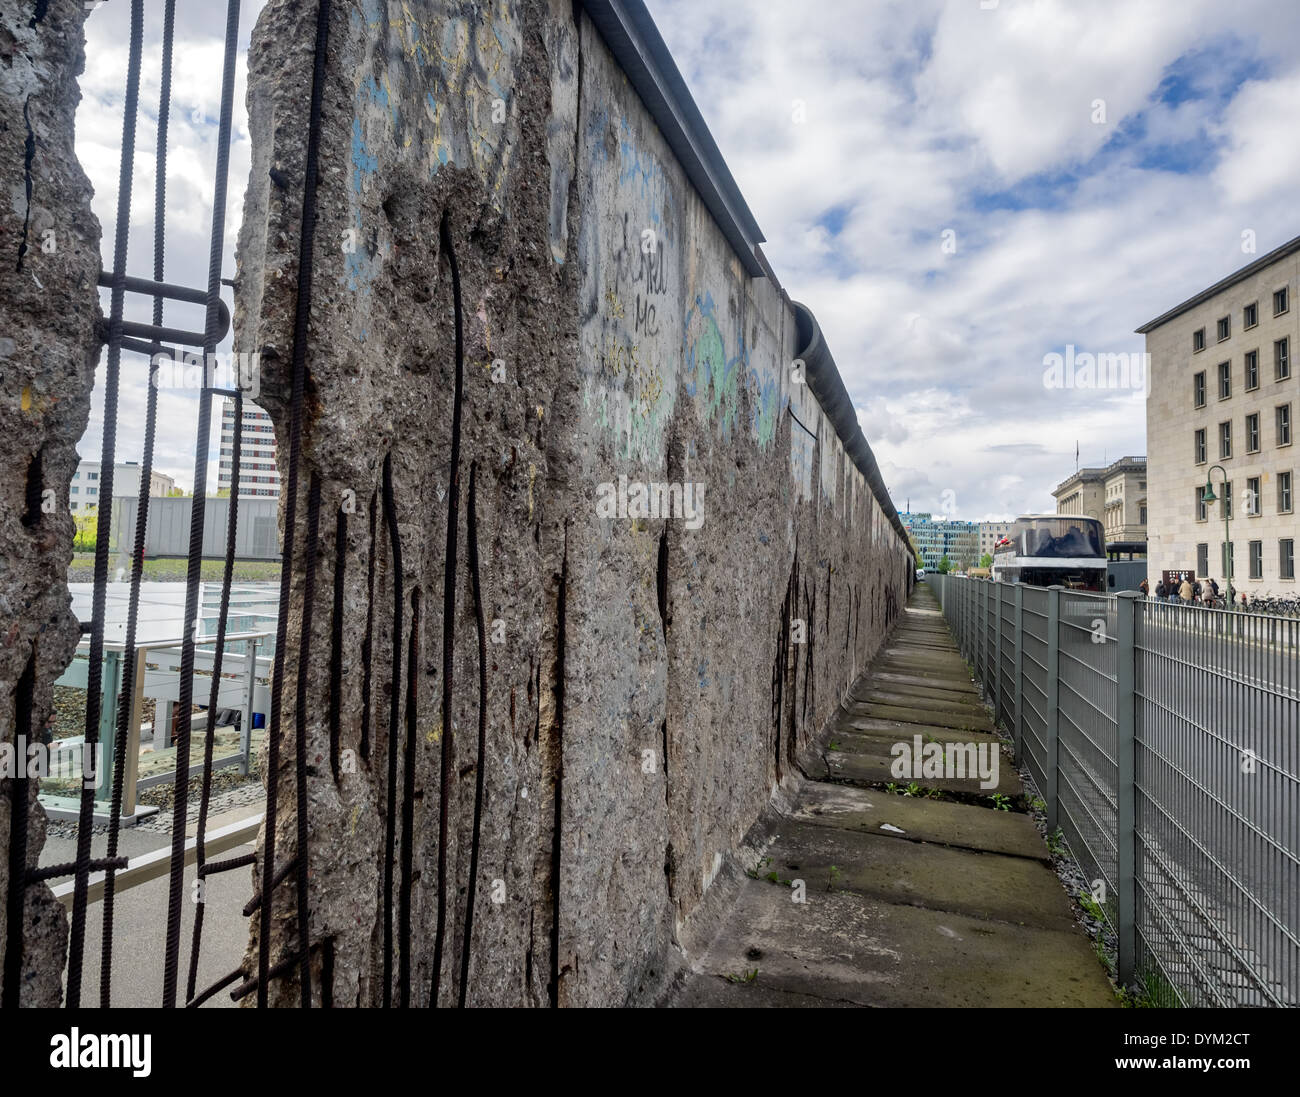 Remains of the Berlin Wall preserved along Bernauer Strasse Stock Photo